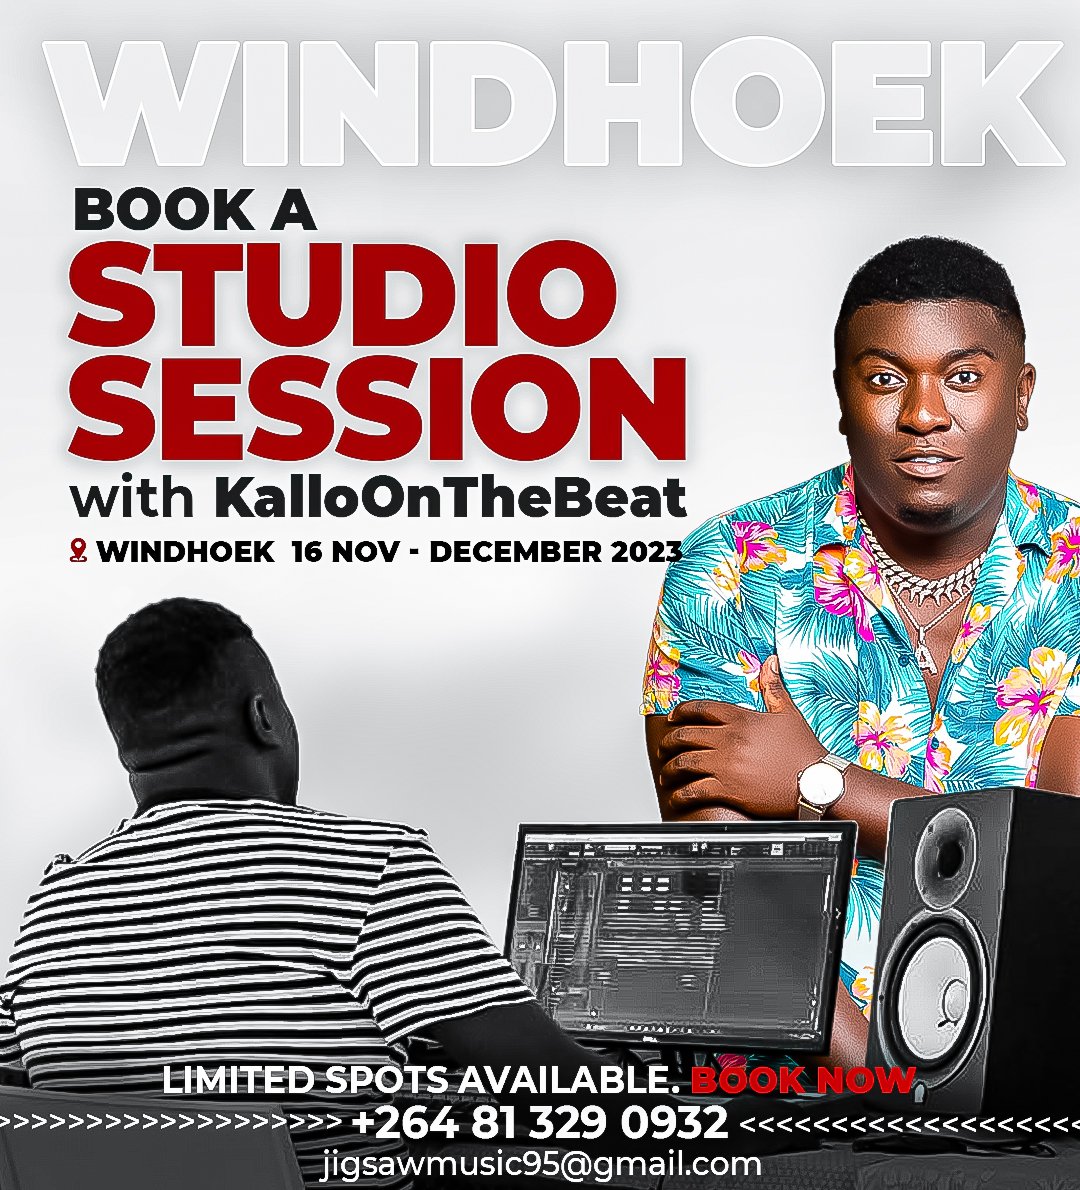 Don't miss out on the chance to create musical masterpieces with KalloOnTheBeat in Windhoek! 🌬️ - Call the number and let the studio sessions begin. 🎹📲 #KalloOnTheBeat #Ibelieve